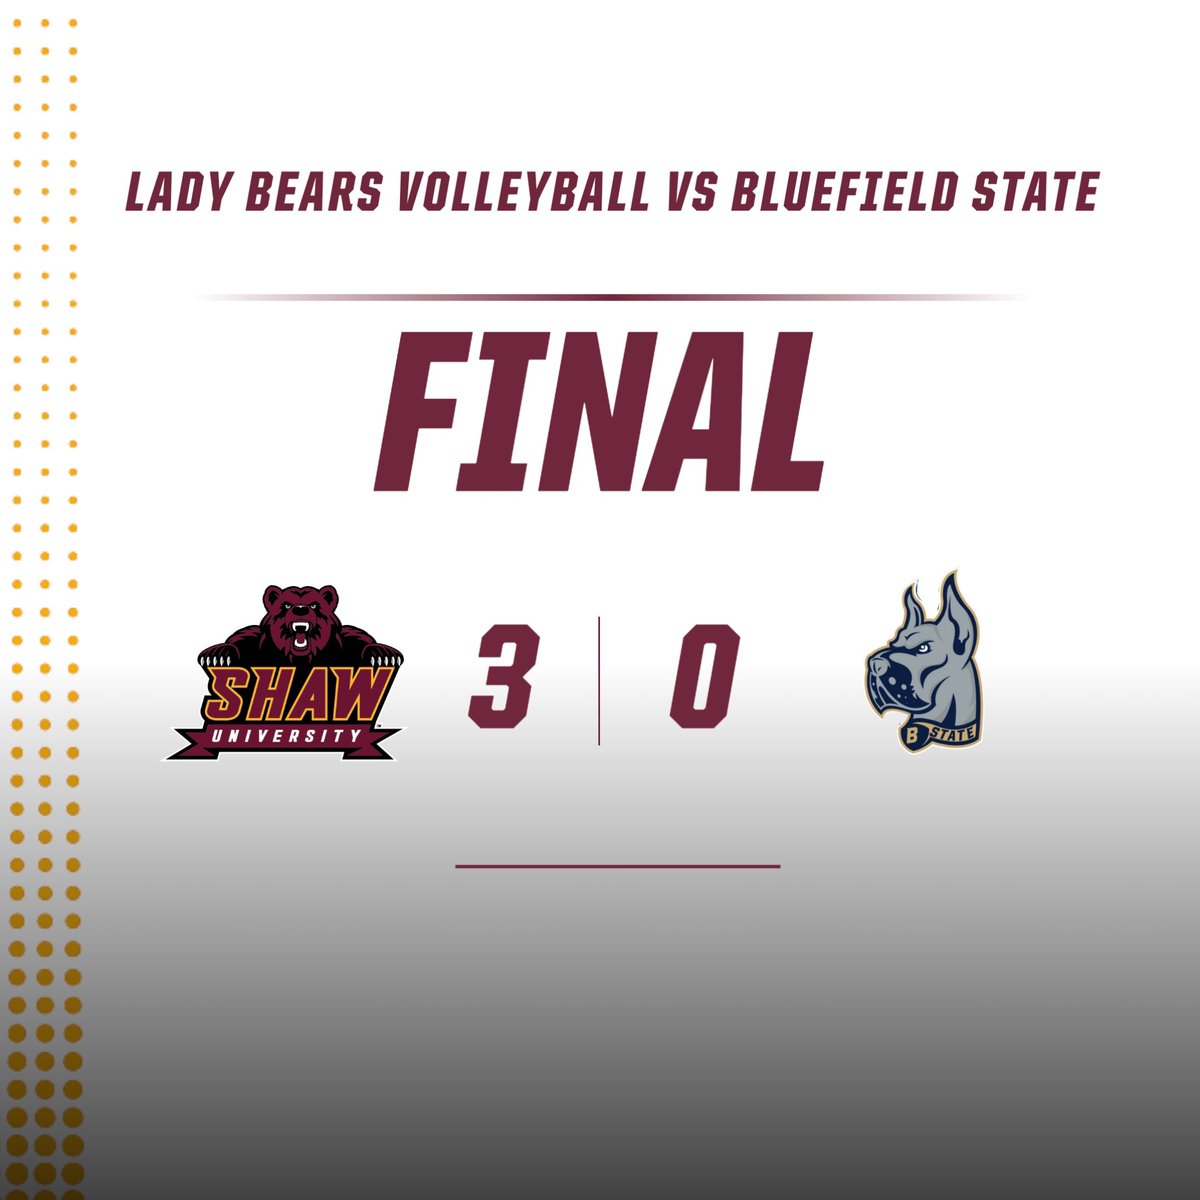 Another one for the Lady Bears on the road.